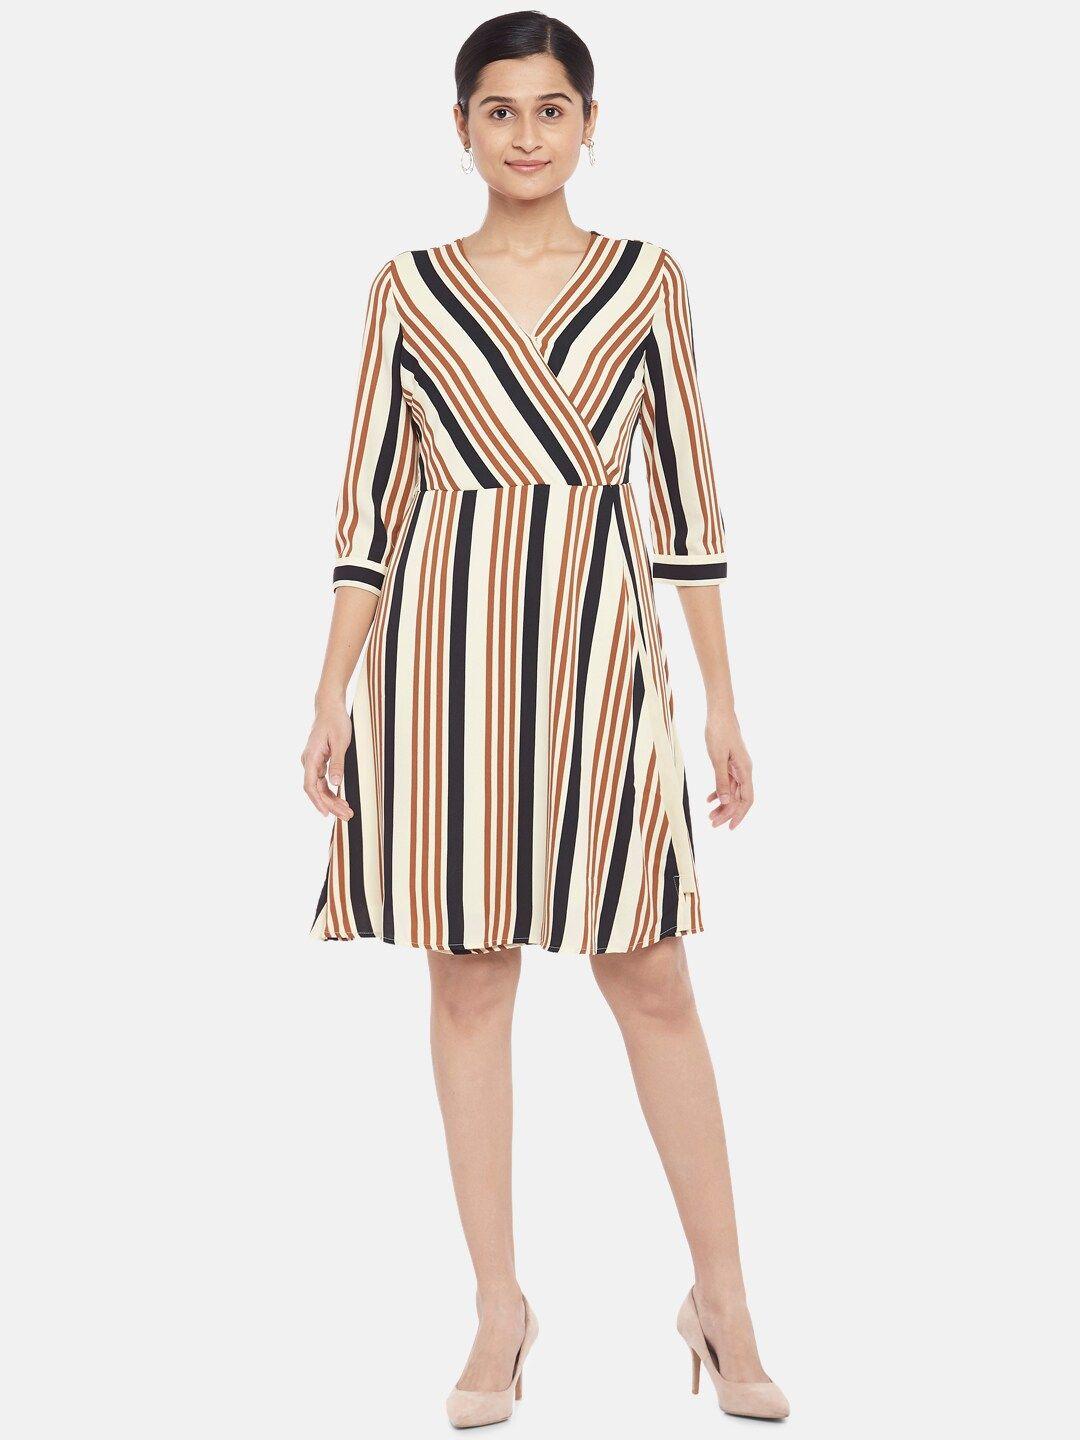 annabelle by pantaloons brown & cream-coloured striped dress